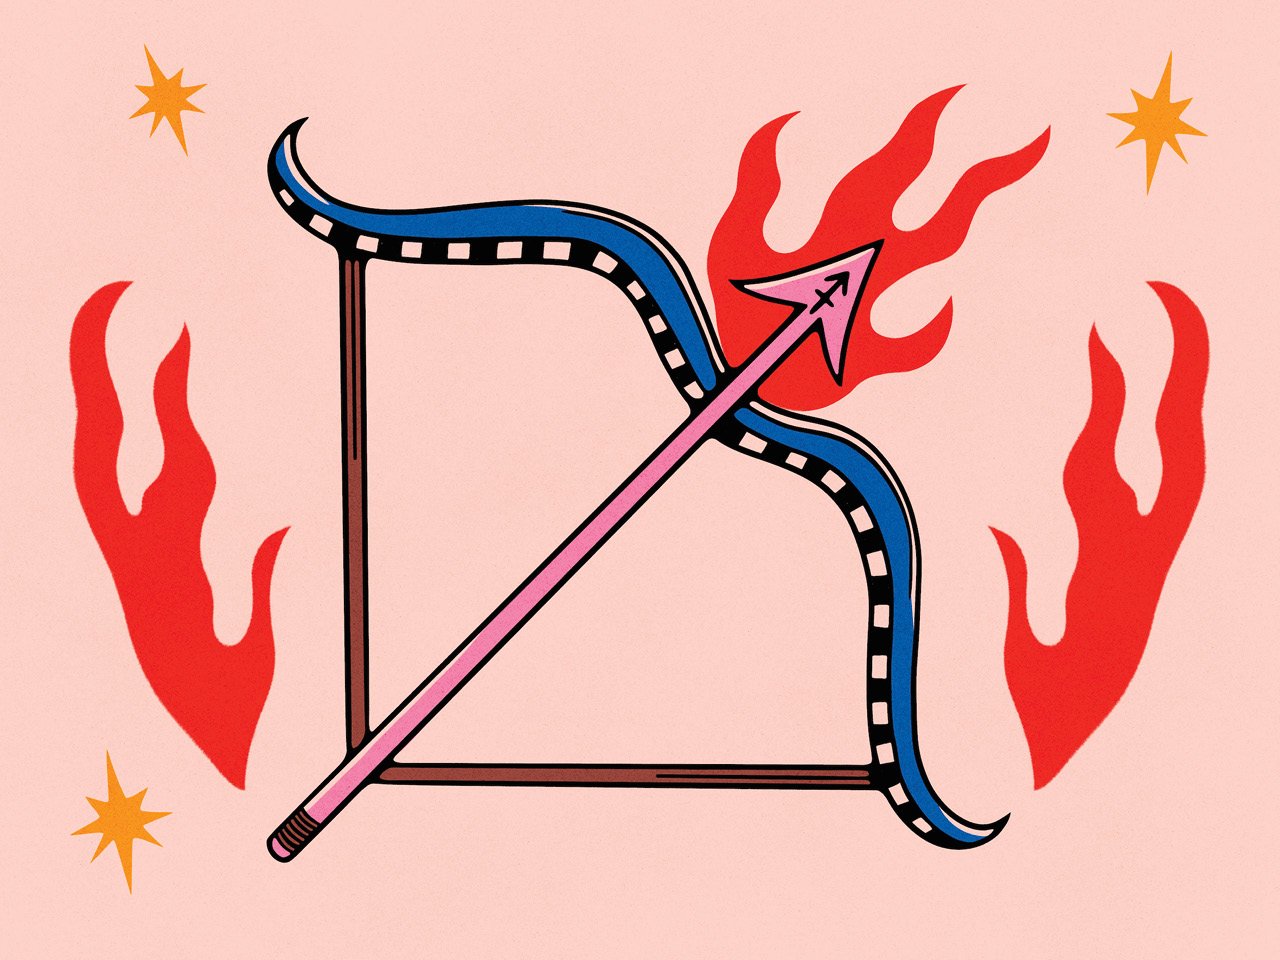 An illustration of a bow and arrow with a flaming tip. the arrowhead has the Sagittarius symbol on it.